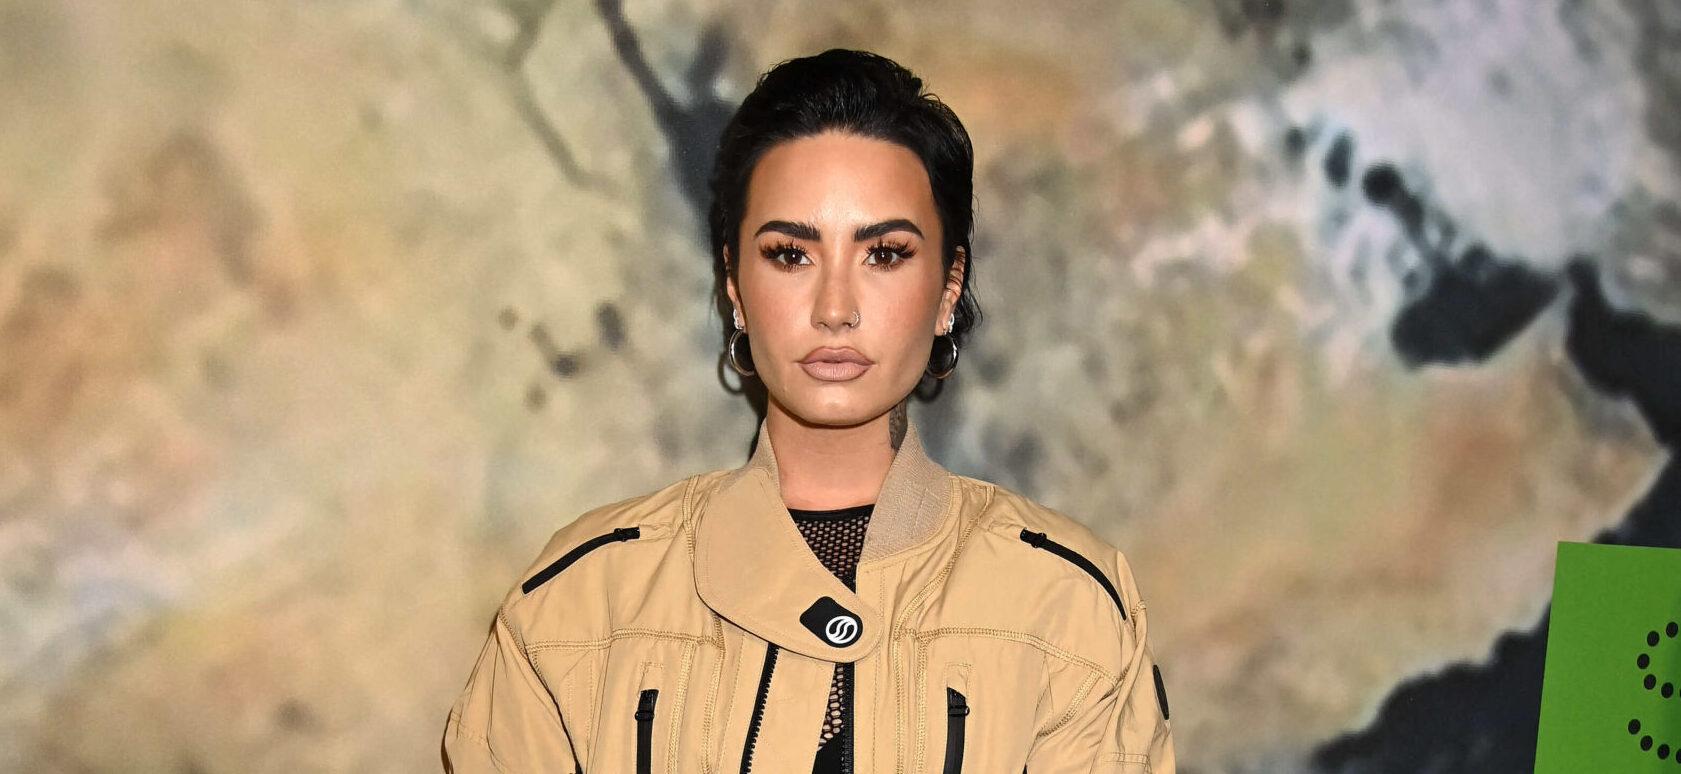 Demi Lovato Is ‘So Excited’ As She Signs With New Agency Ahead Of Album Release